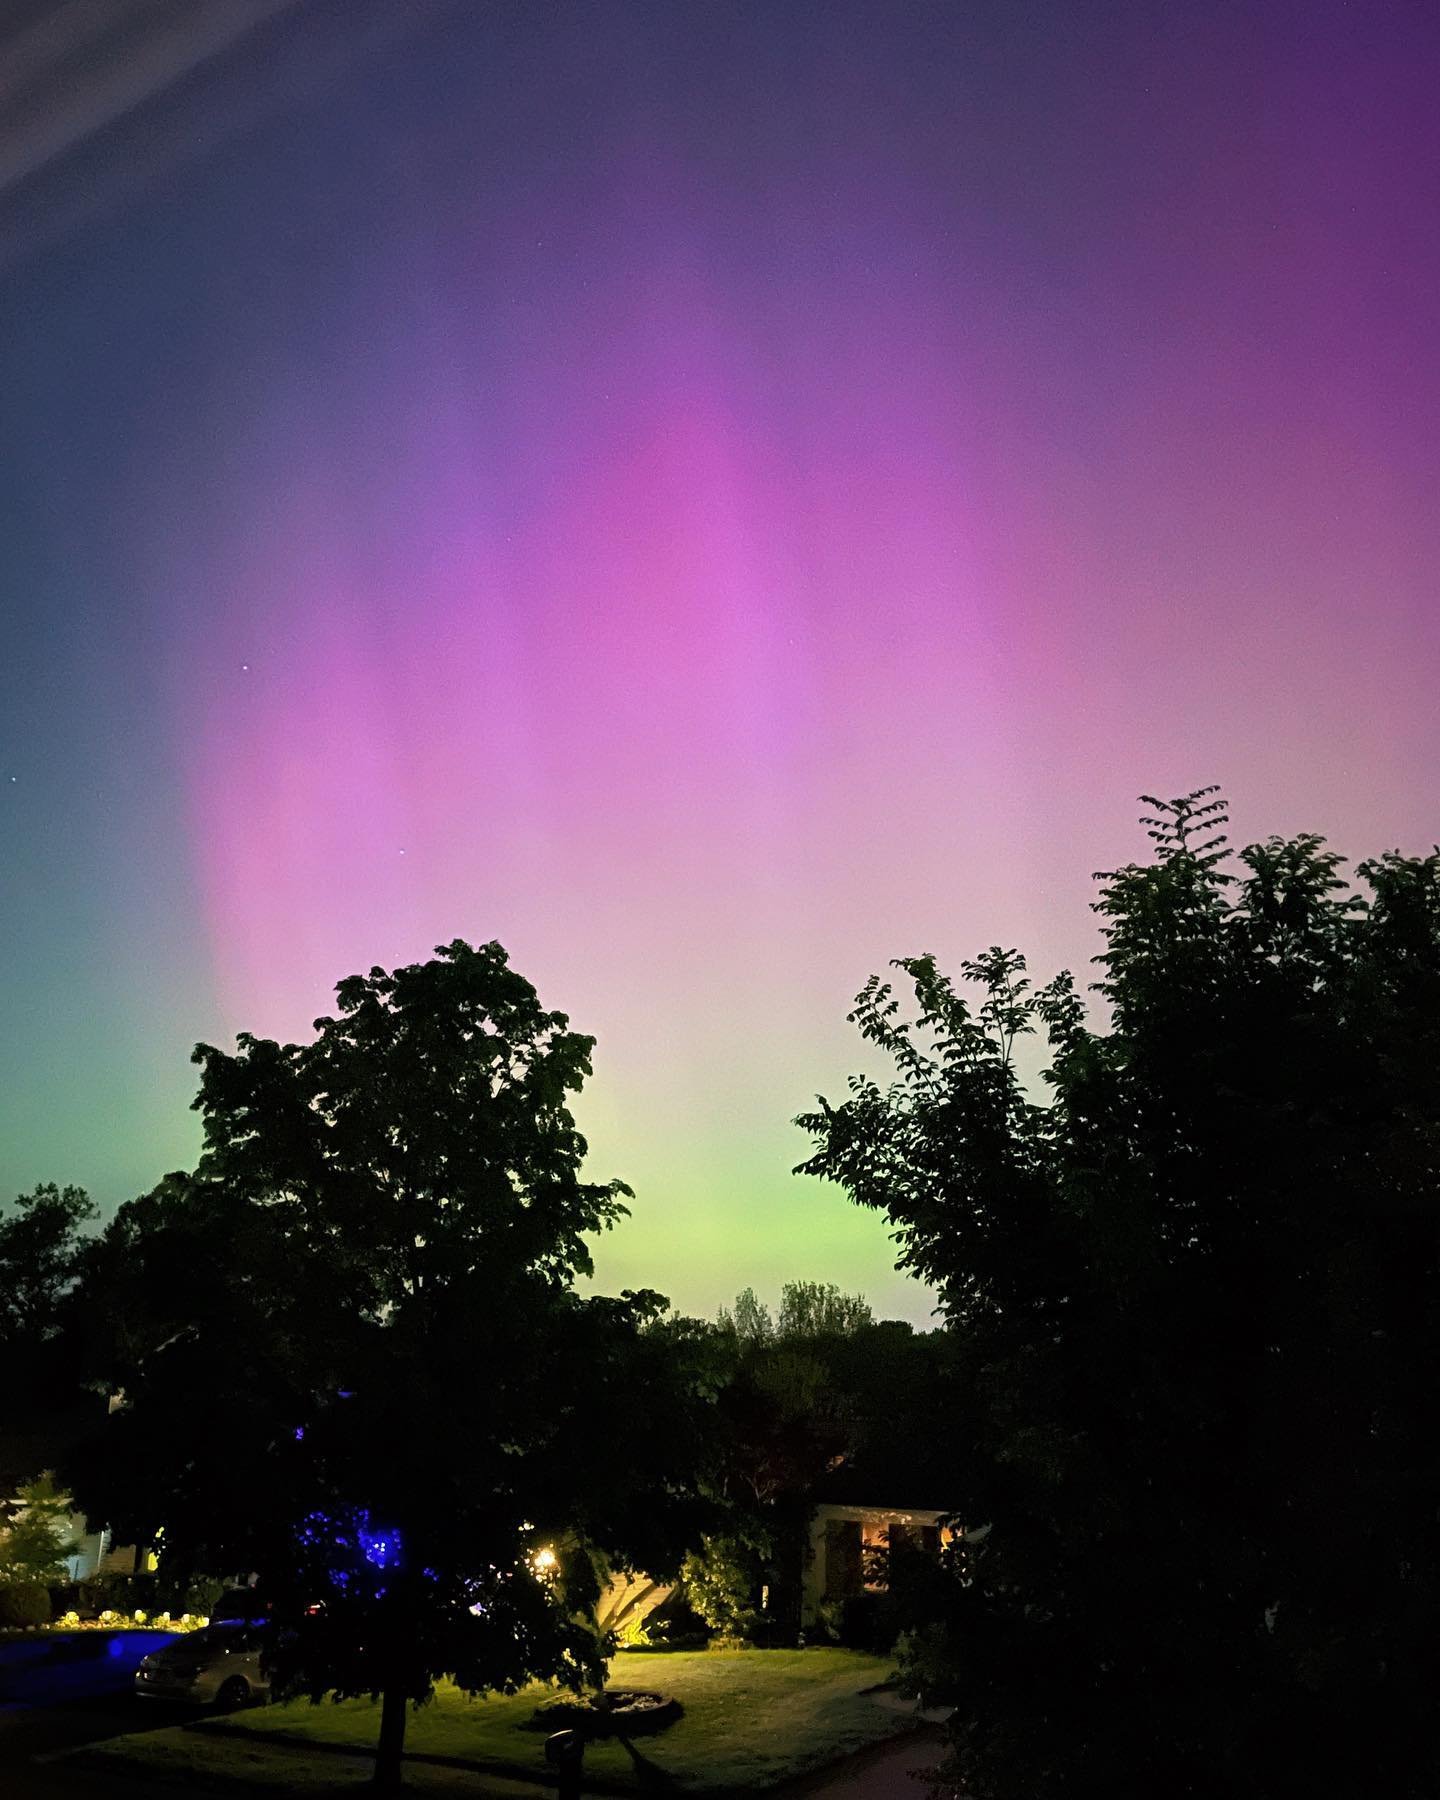 The aurora borealis on 5/10/24. The fact she was visible in Ohio is absolutely wild to me!! 

Shot with long exposure and bumped the saturation up a bit
#asseenincolumbus #columbusohio #northernlights #northernlightsohio2024